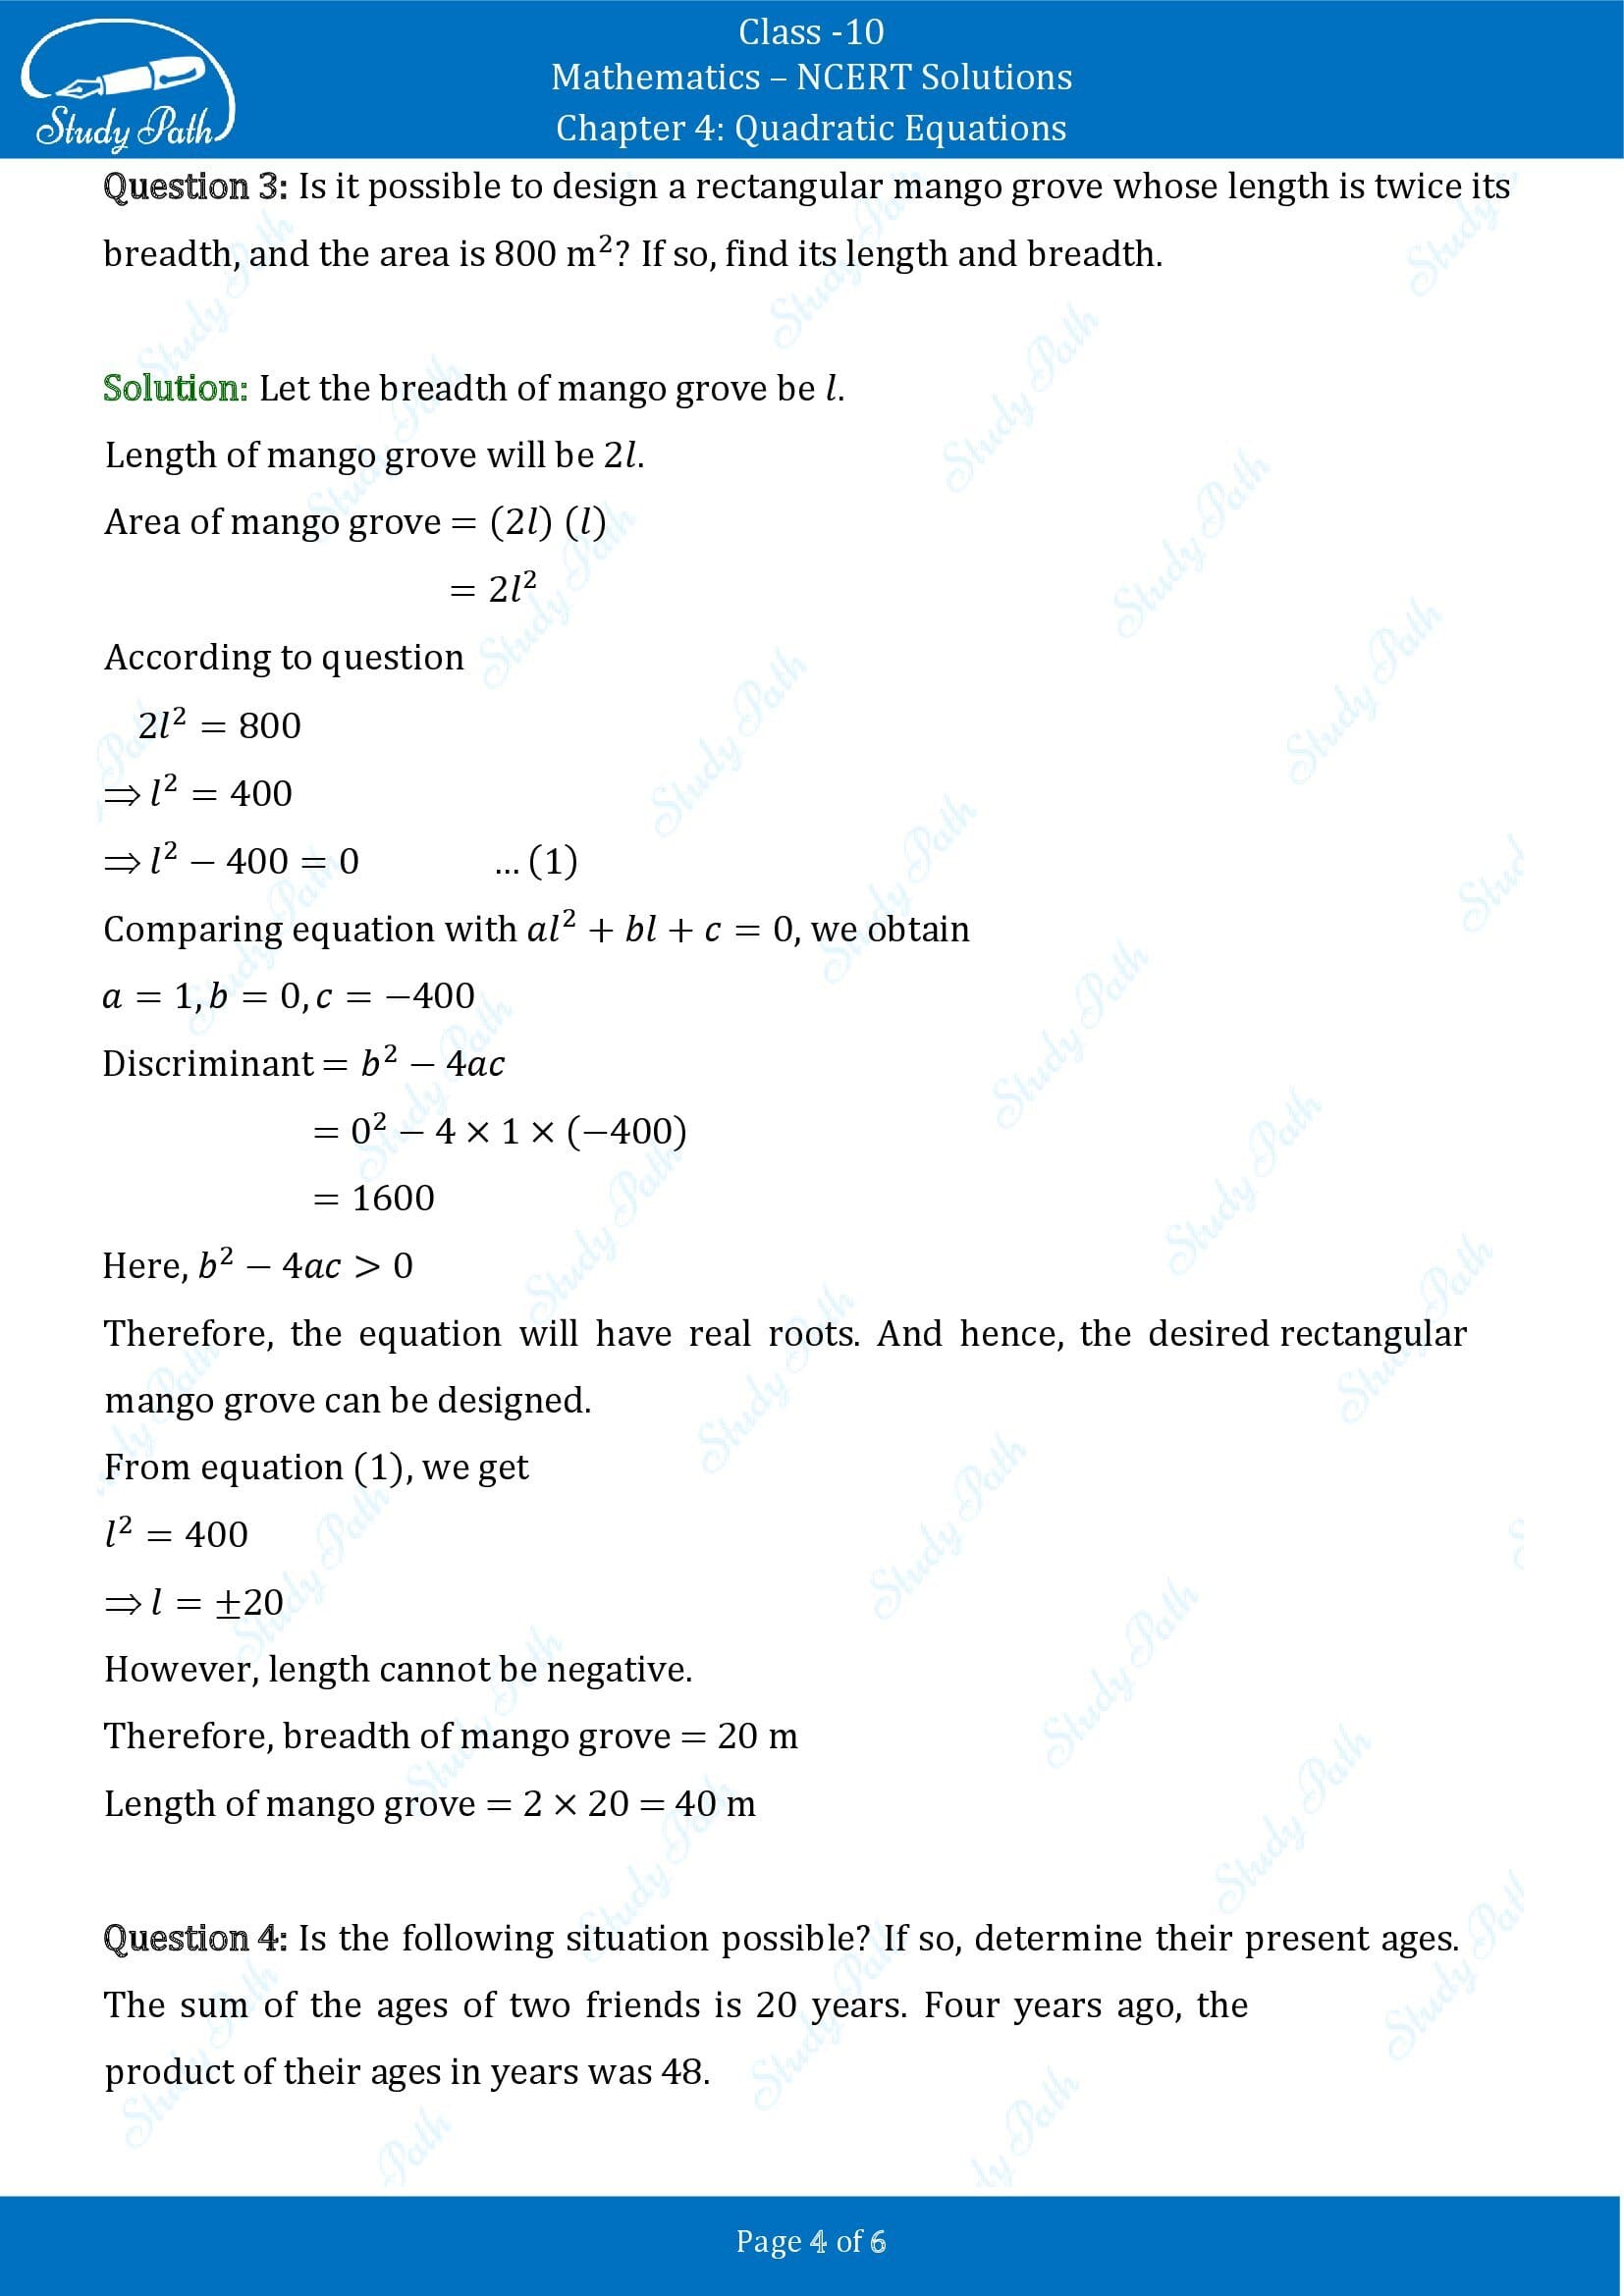 NCERT Solutions for Class 10 Maths Chapter 4 Quadratic Equations Exercise 4.4 00004